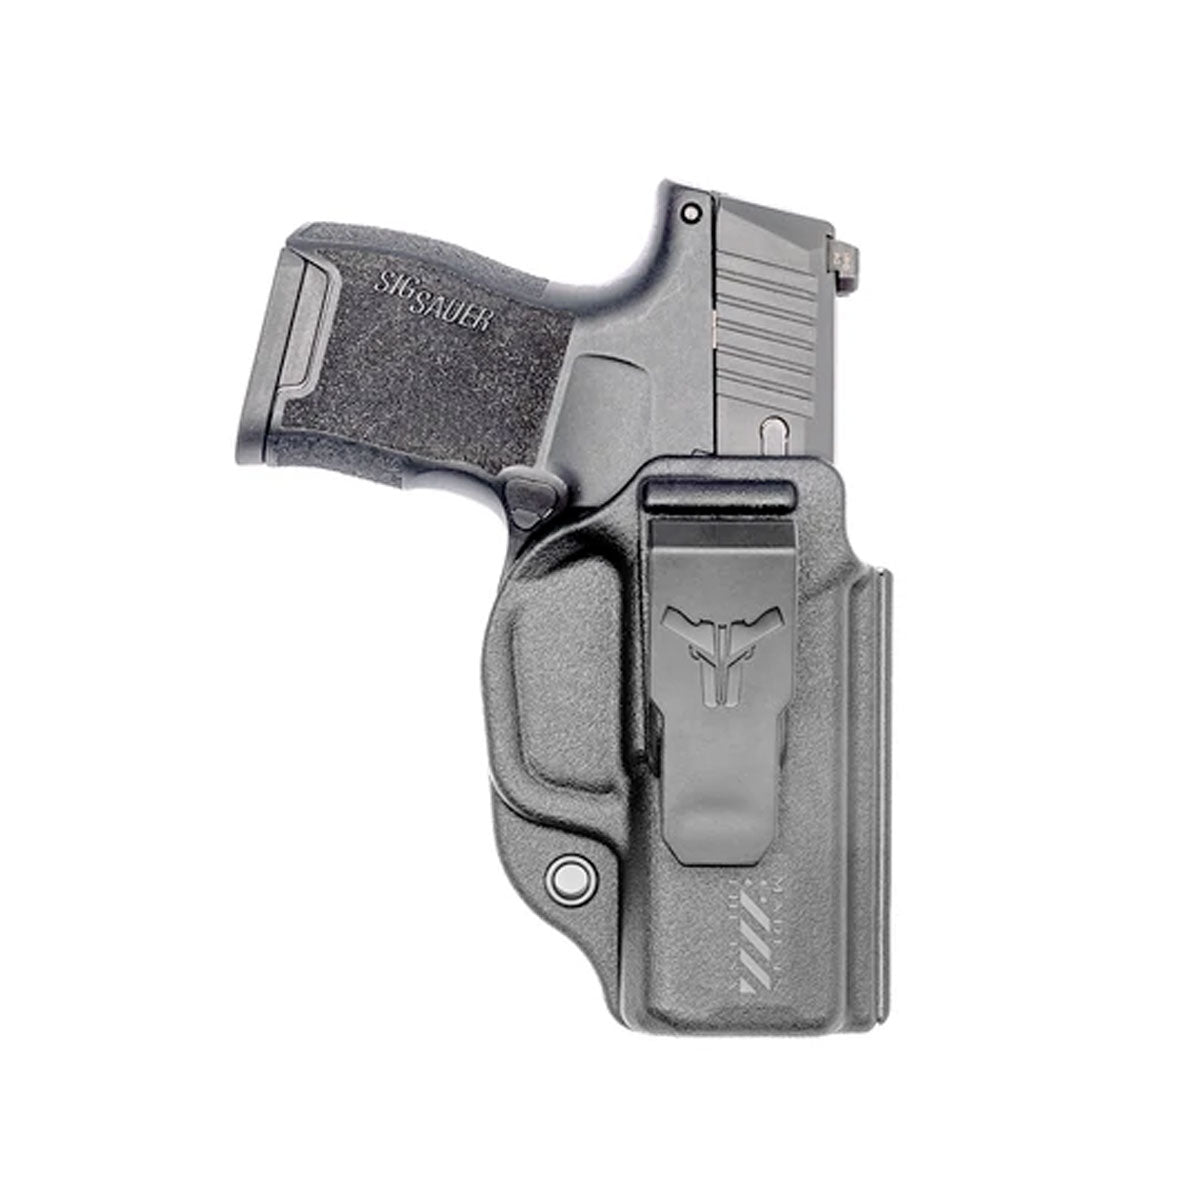 Blade-Tech Klipt IWB Holster Black Right Hand Only Holsters Blade-Tech Holsters Sig P365 Tactical Gear Supplier Tactical Distributors Australia